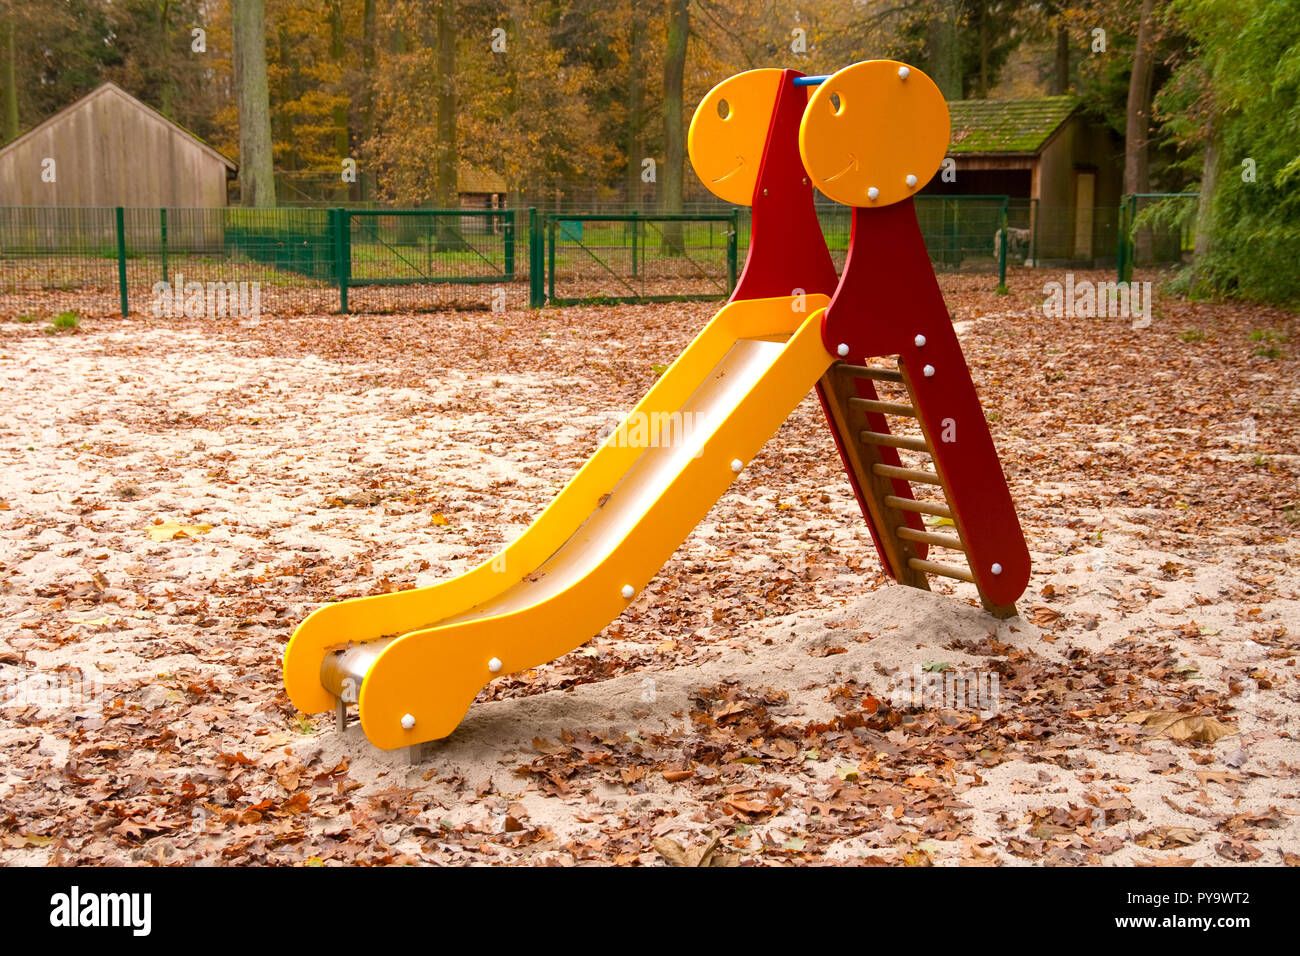 Empt slide at the playground Stock Photo